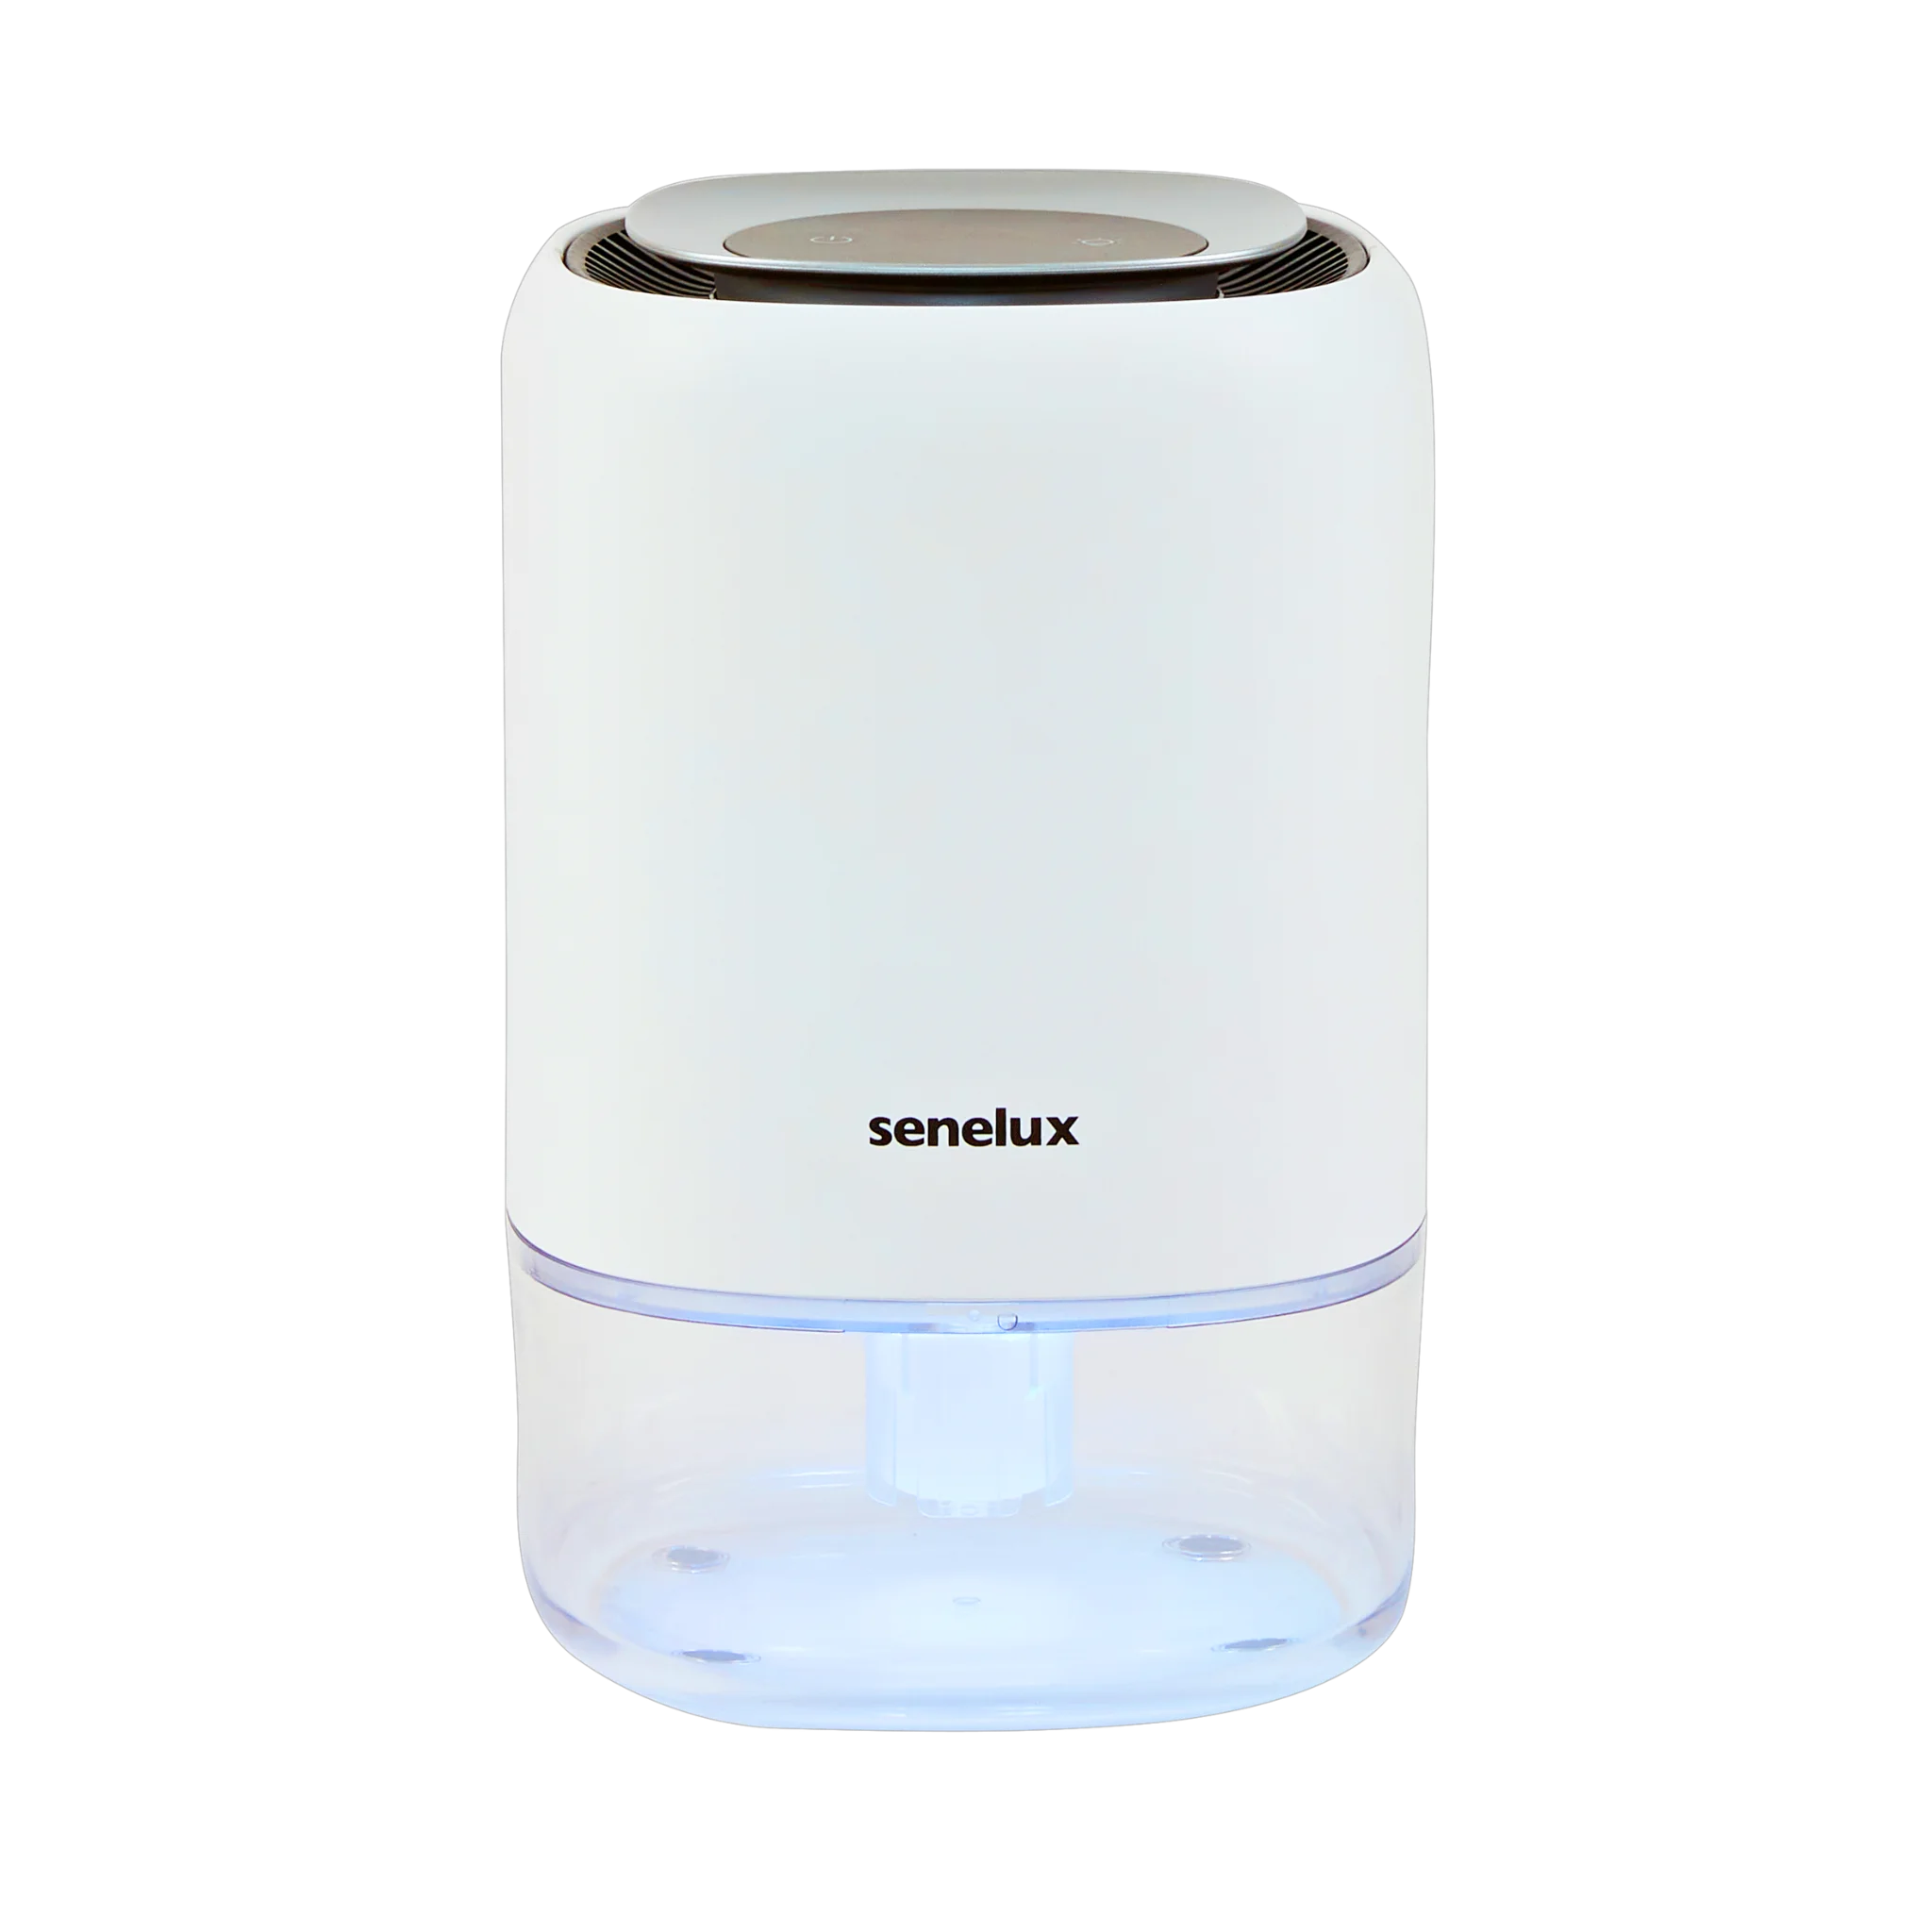 1100ml dehumidifier fully switched on with colour changing LED lights currently showing the blue colour vibrantly.